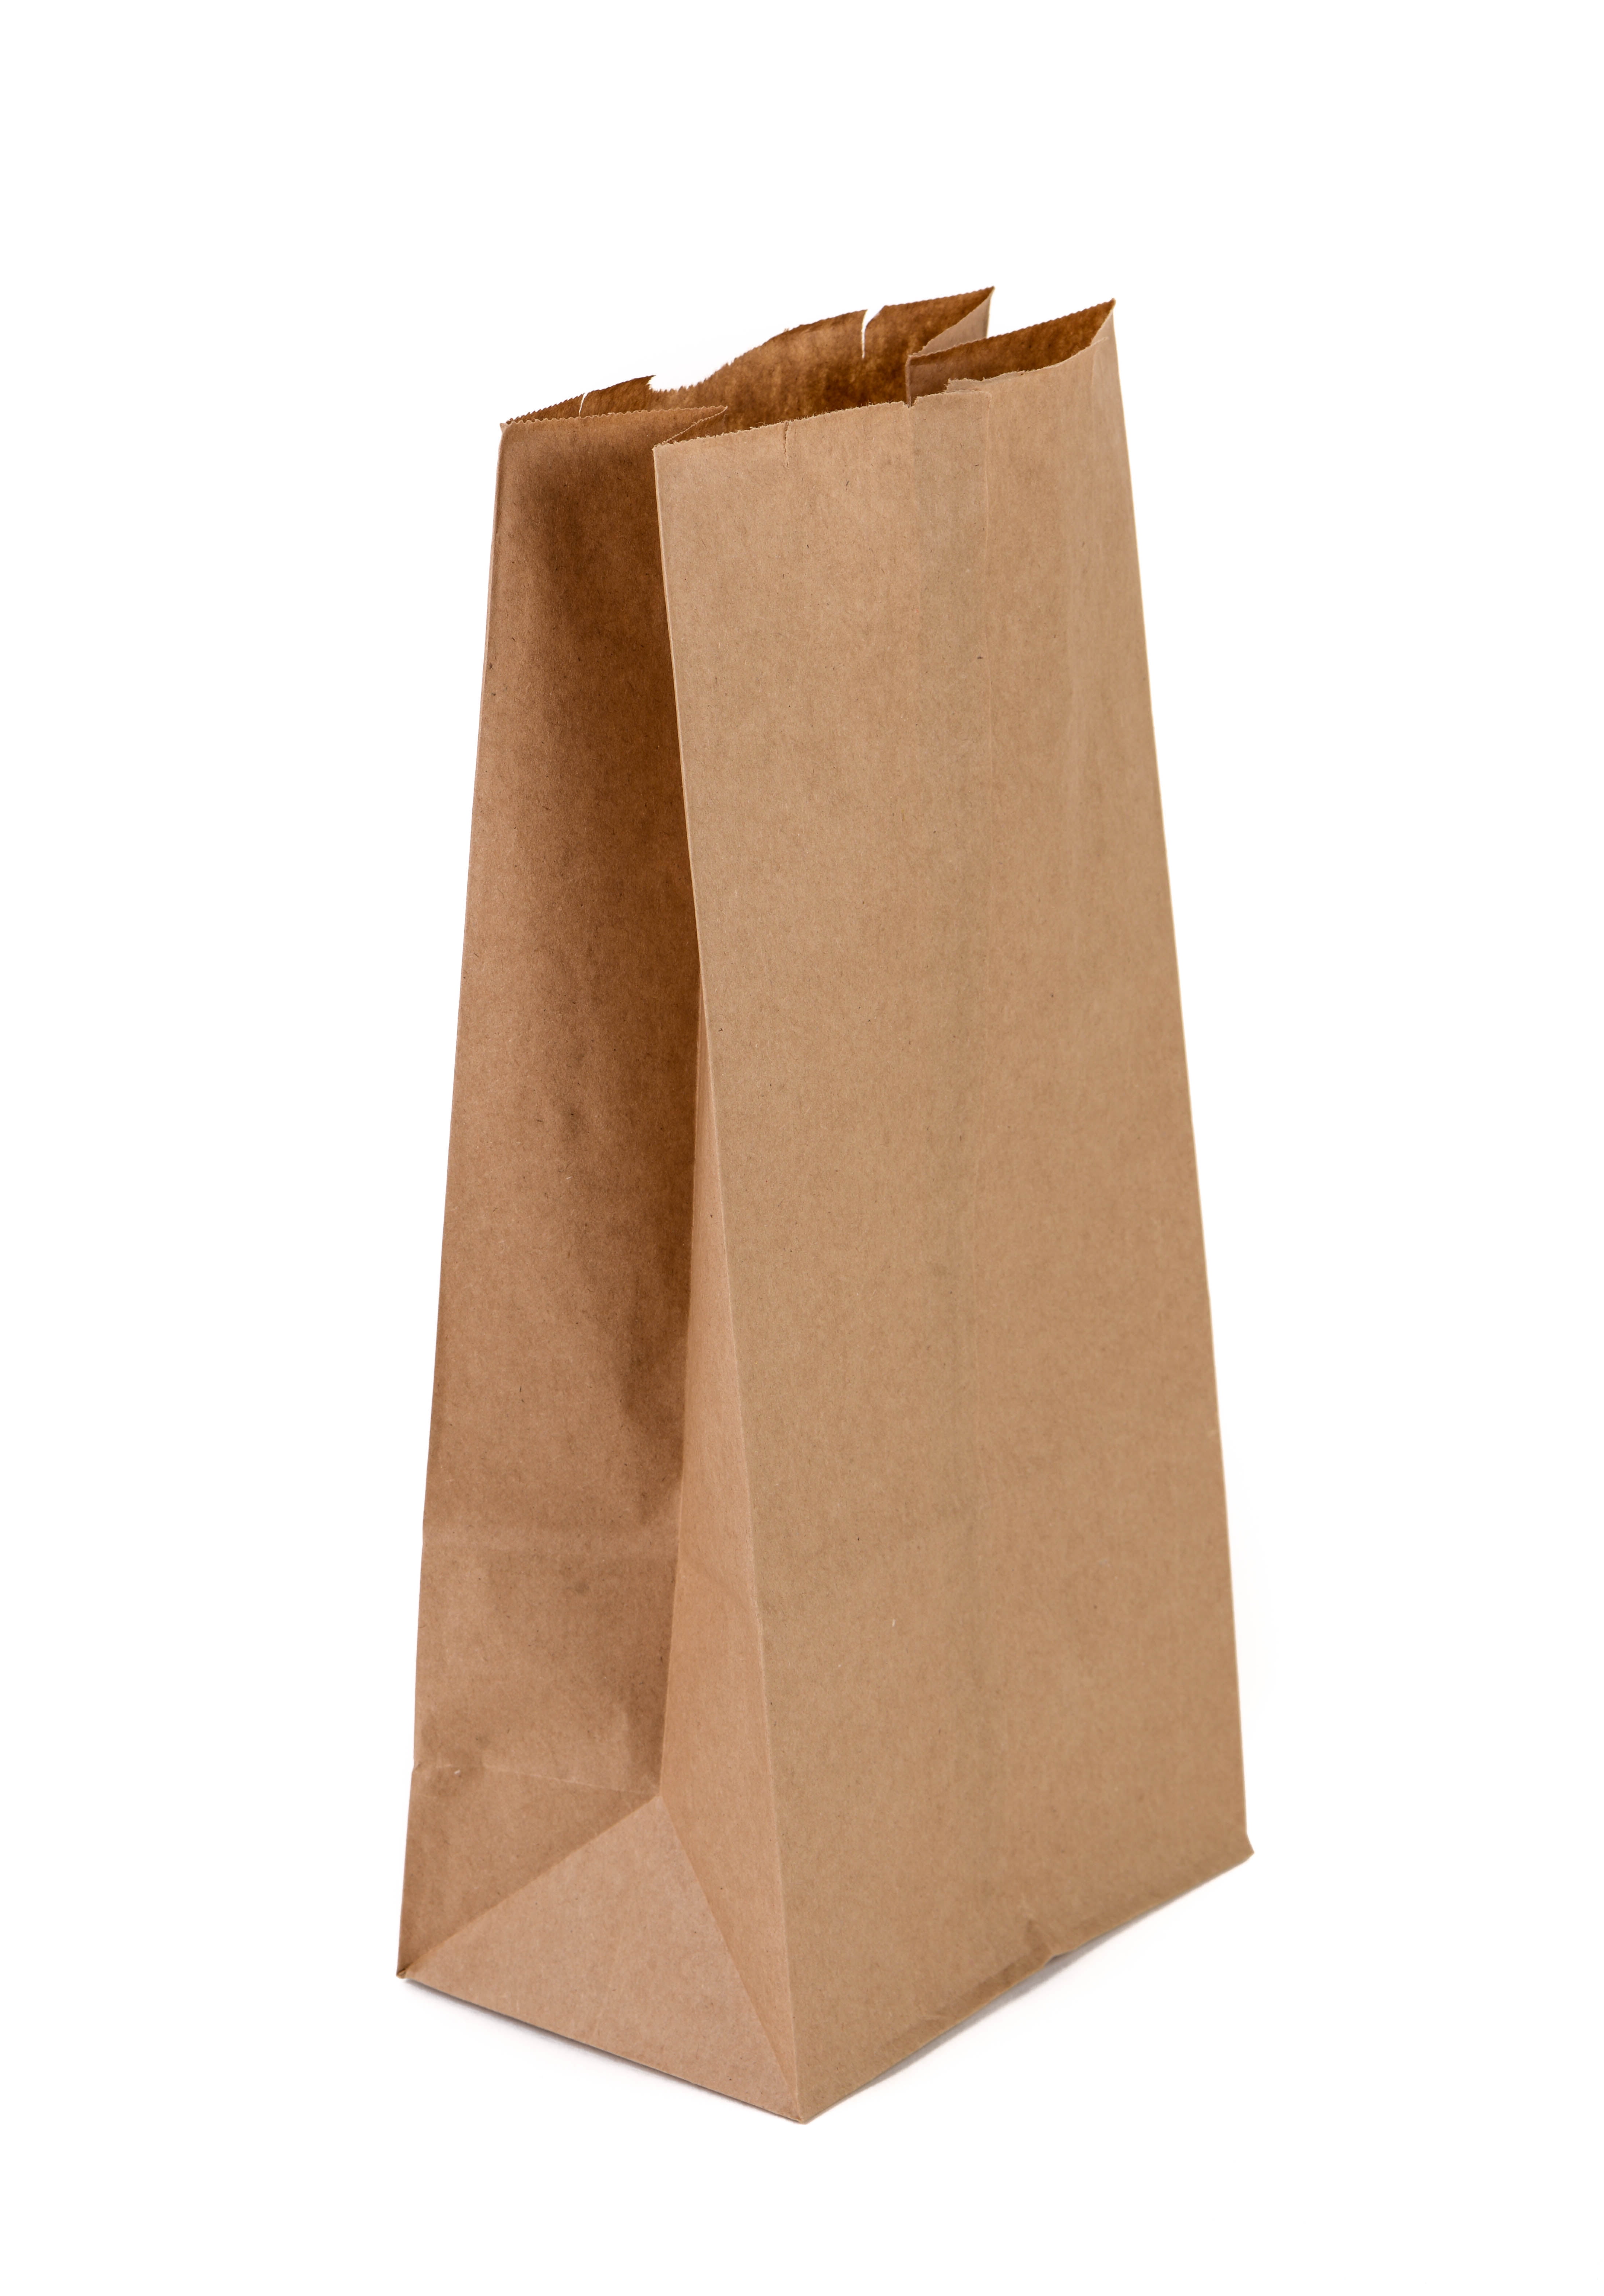 20 X MEDIUM BAG BROWN SOS PAPER CARRIER BAGS WITH HANDLE FOR FOOD SANDWICH LUNCH 